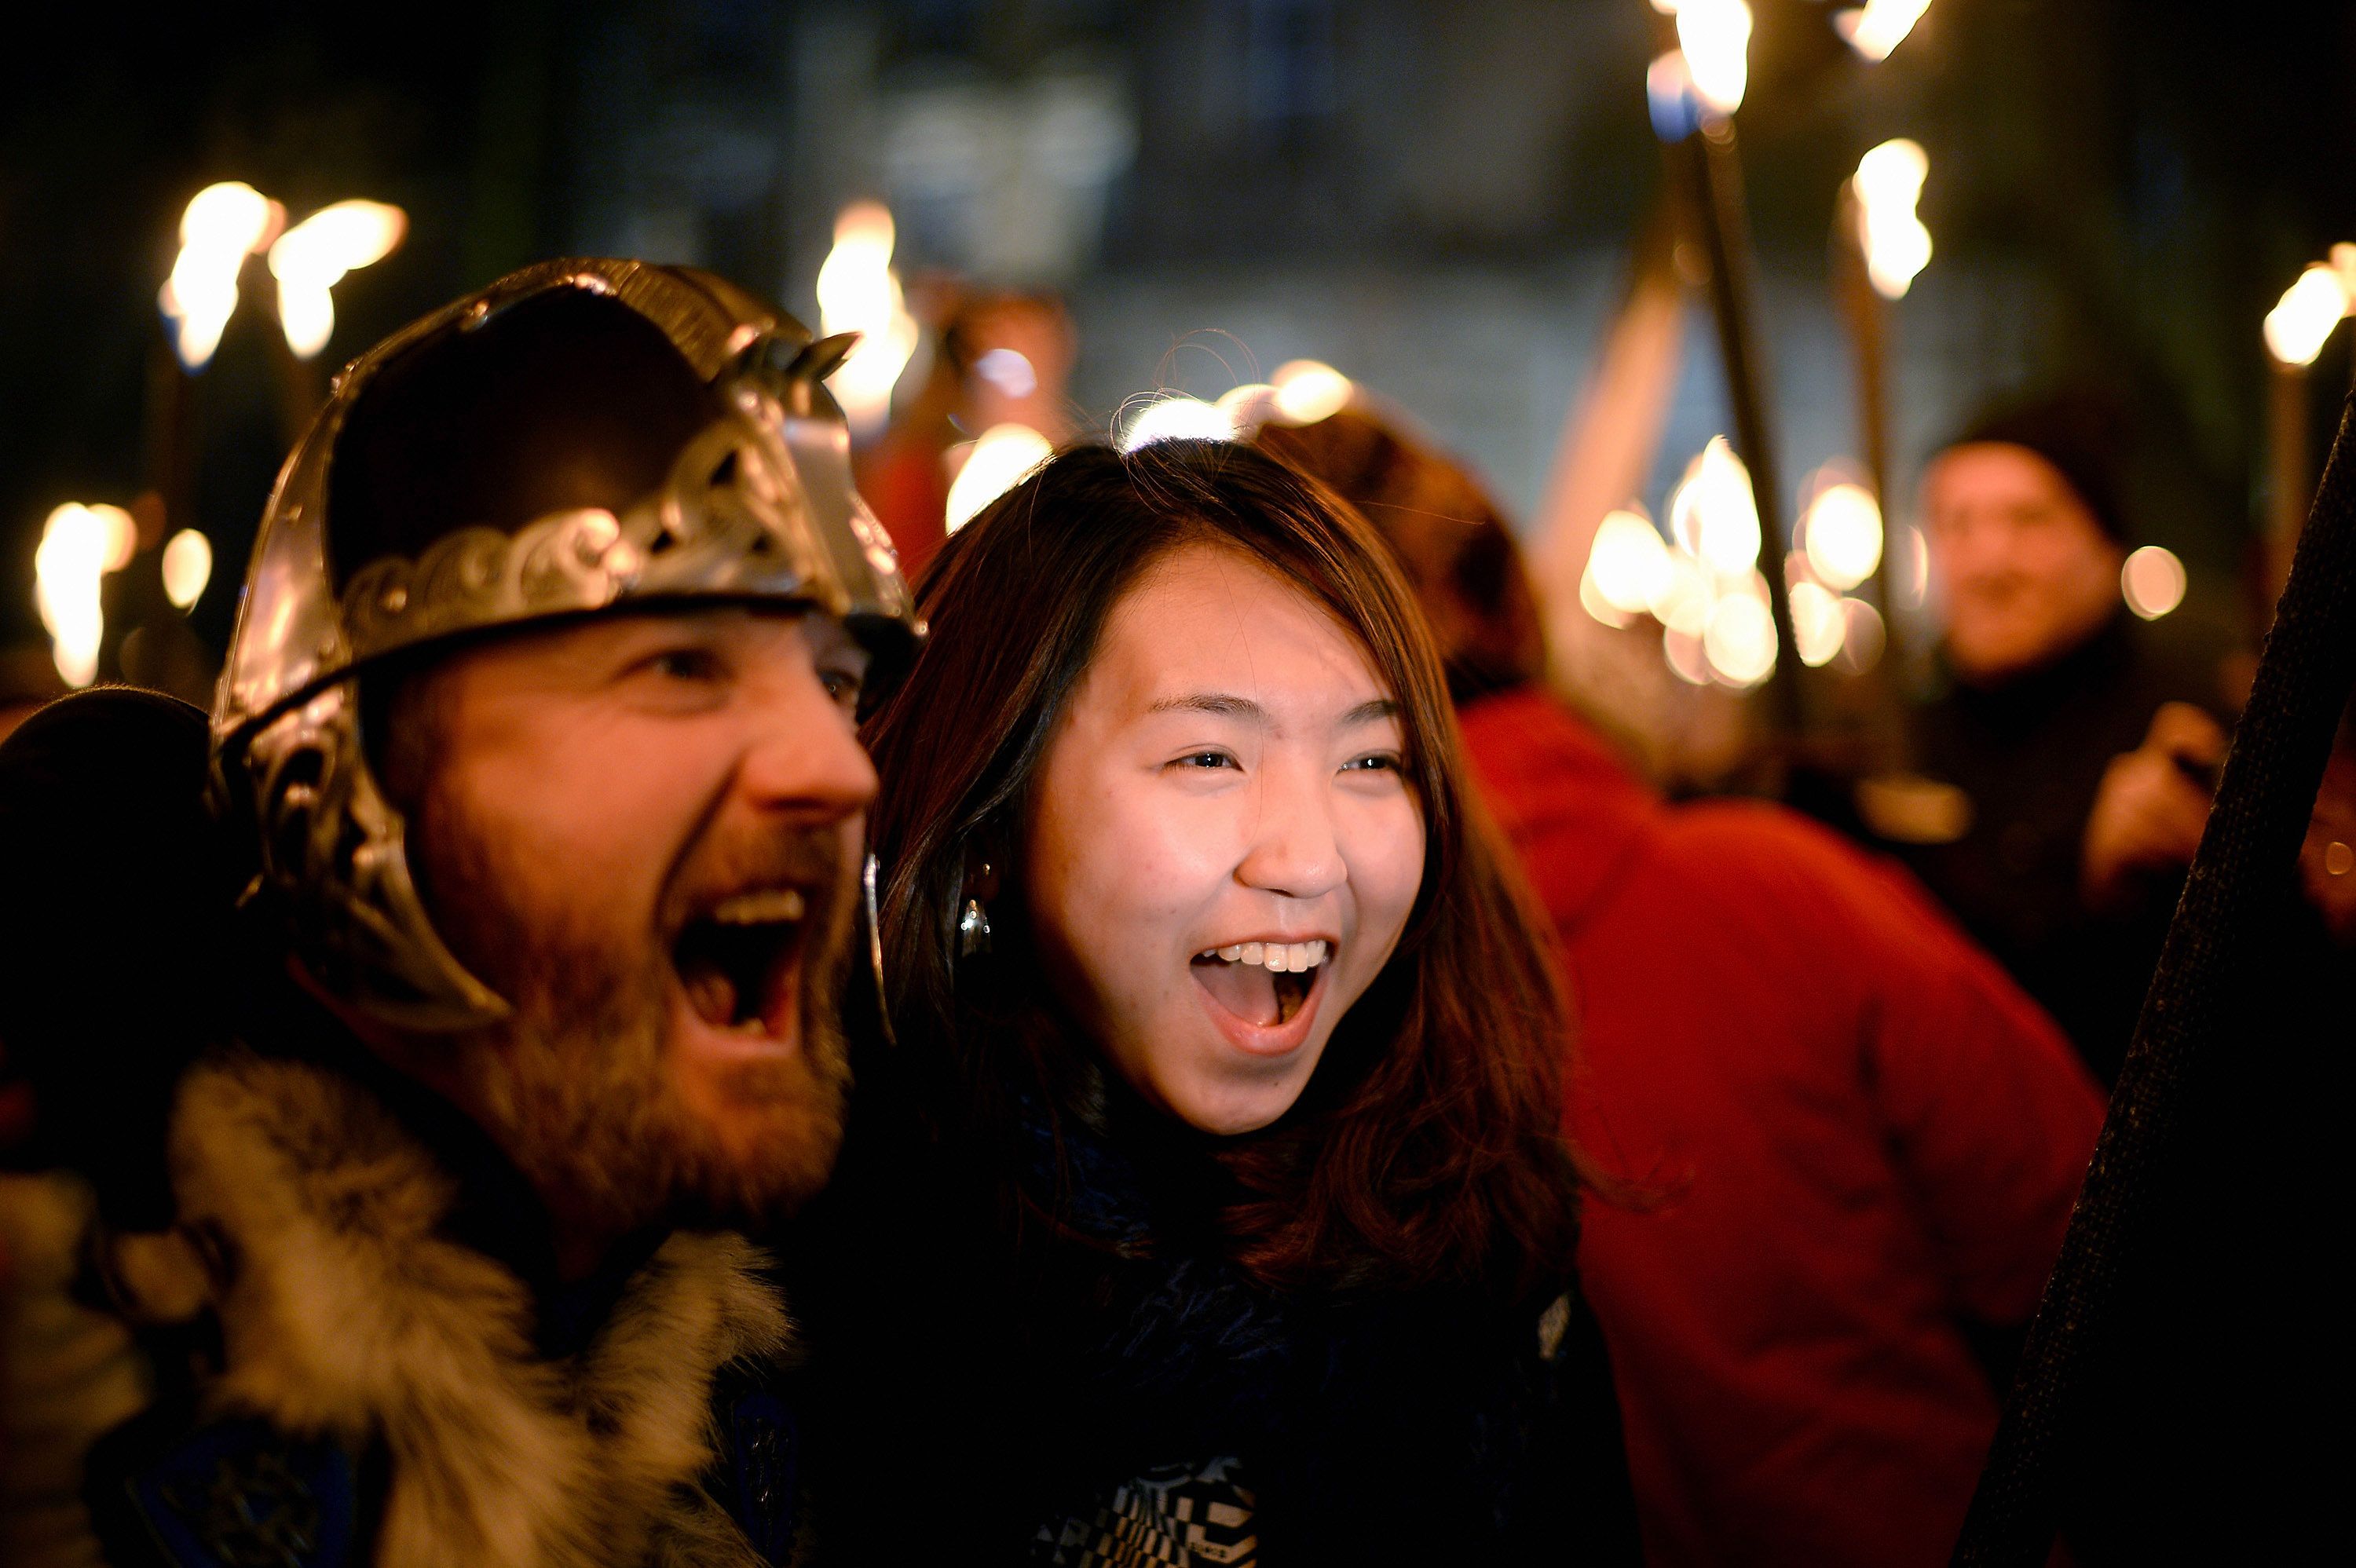 Viking and Lady Friend on New Year's Eve